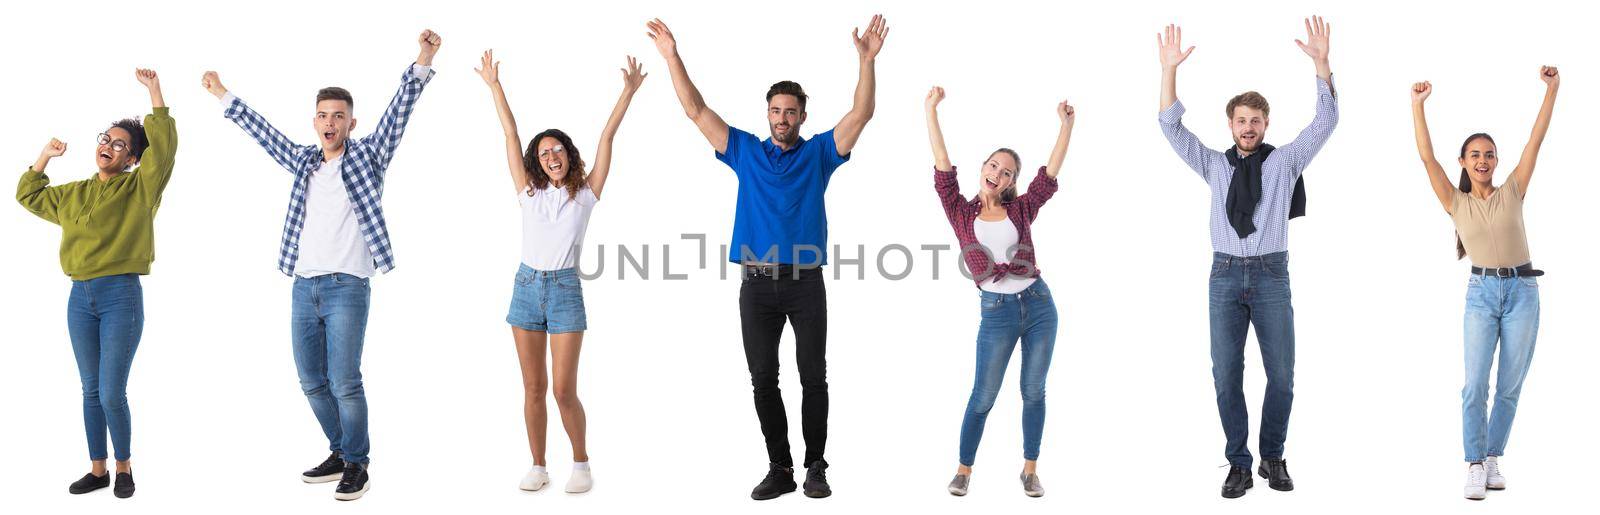 Collage of full length portriats of people in casual clothes isolated on white background